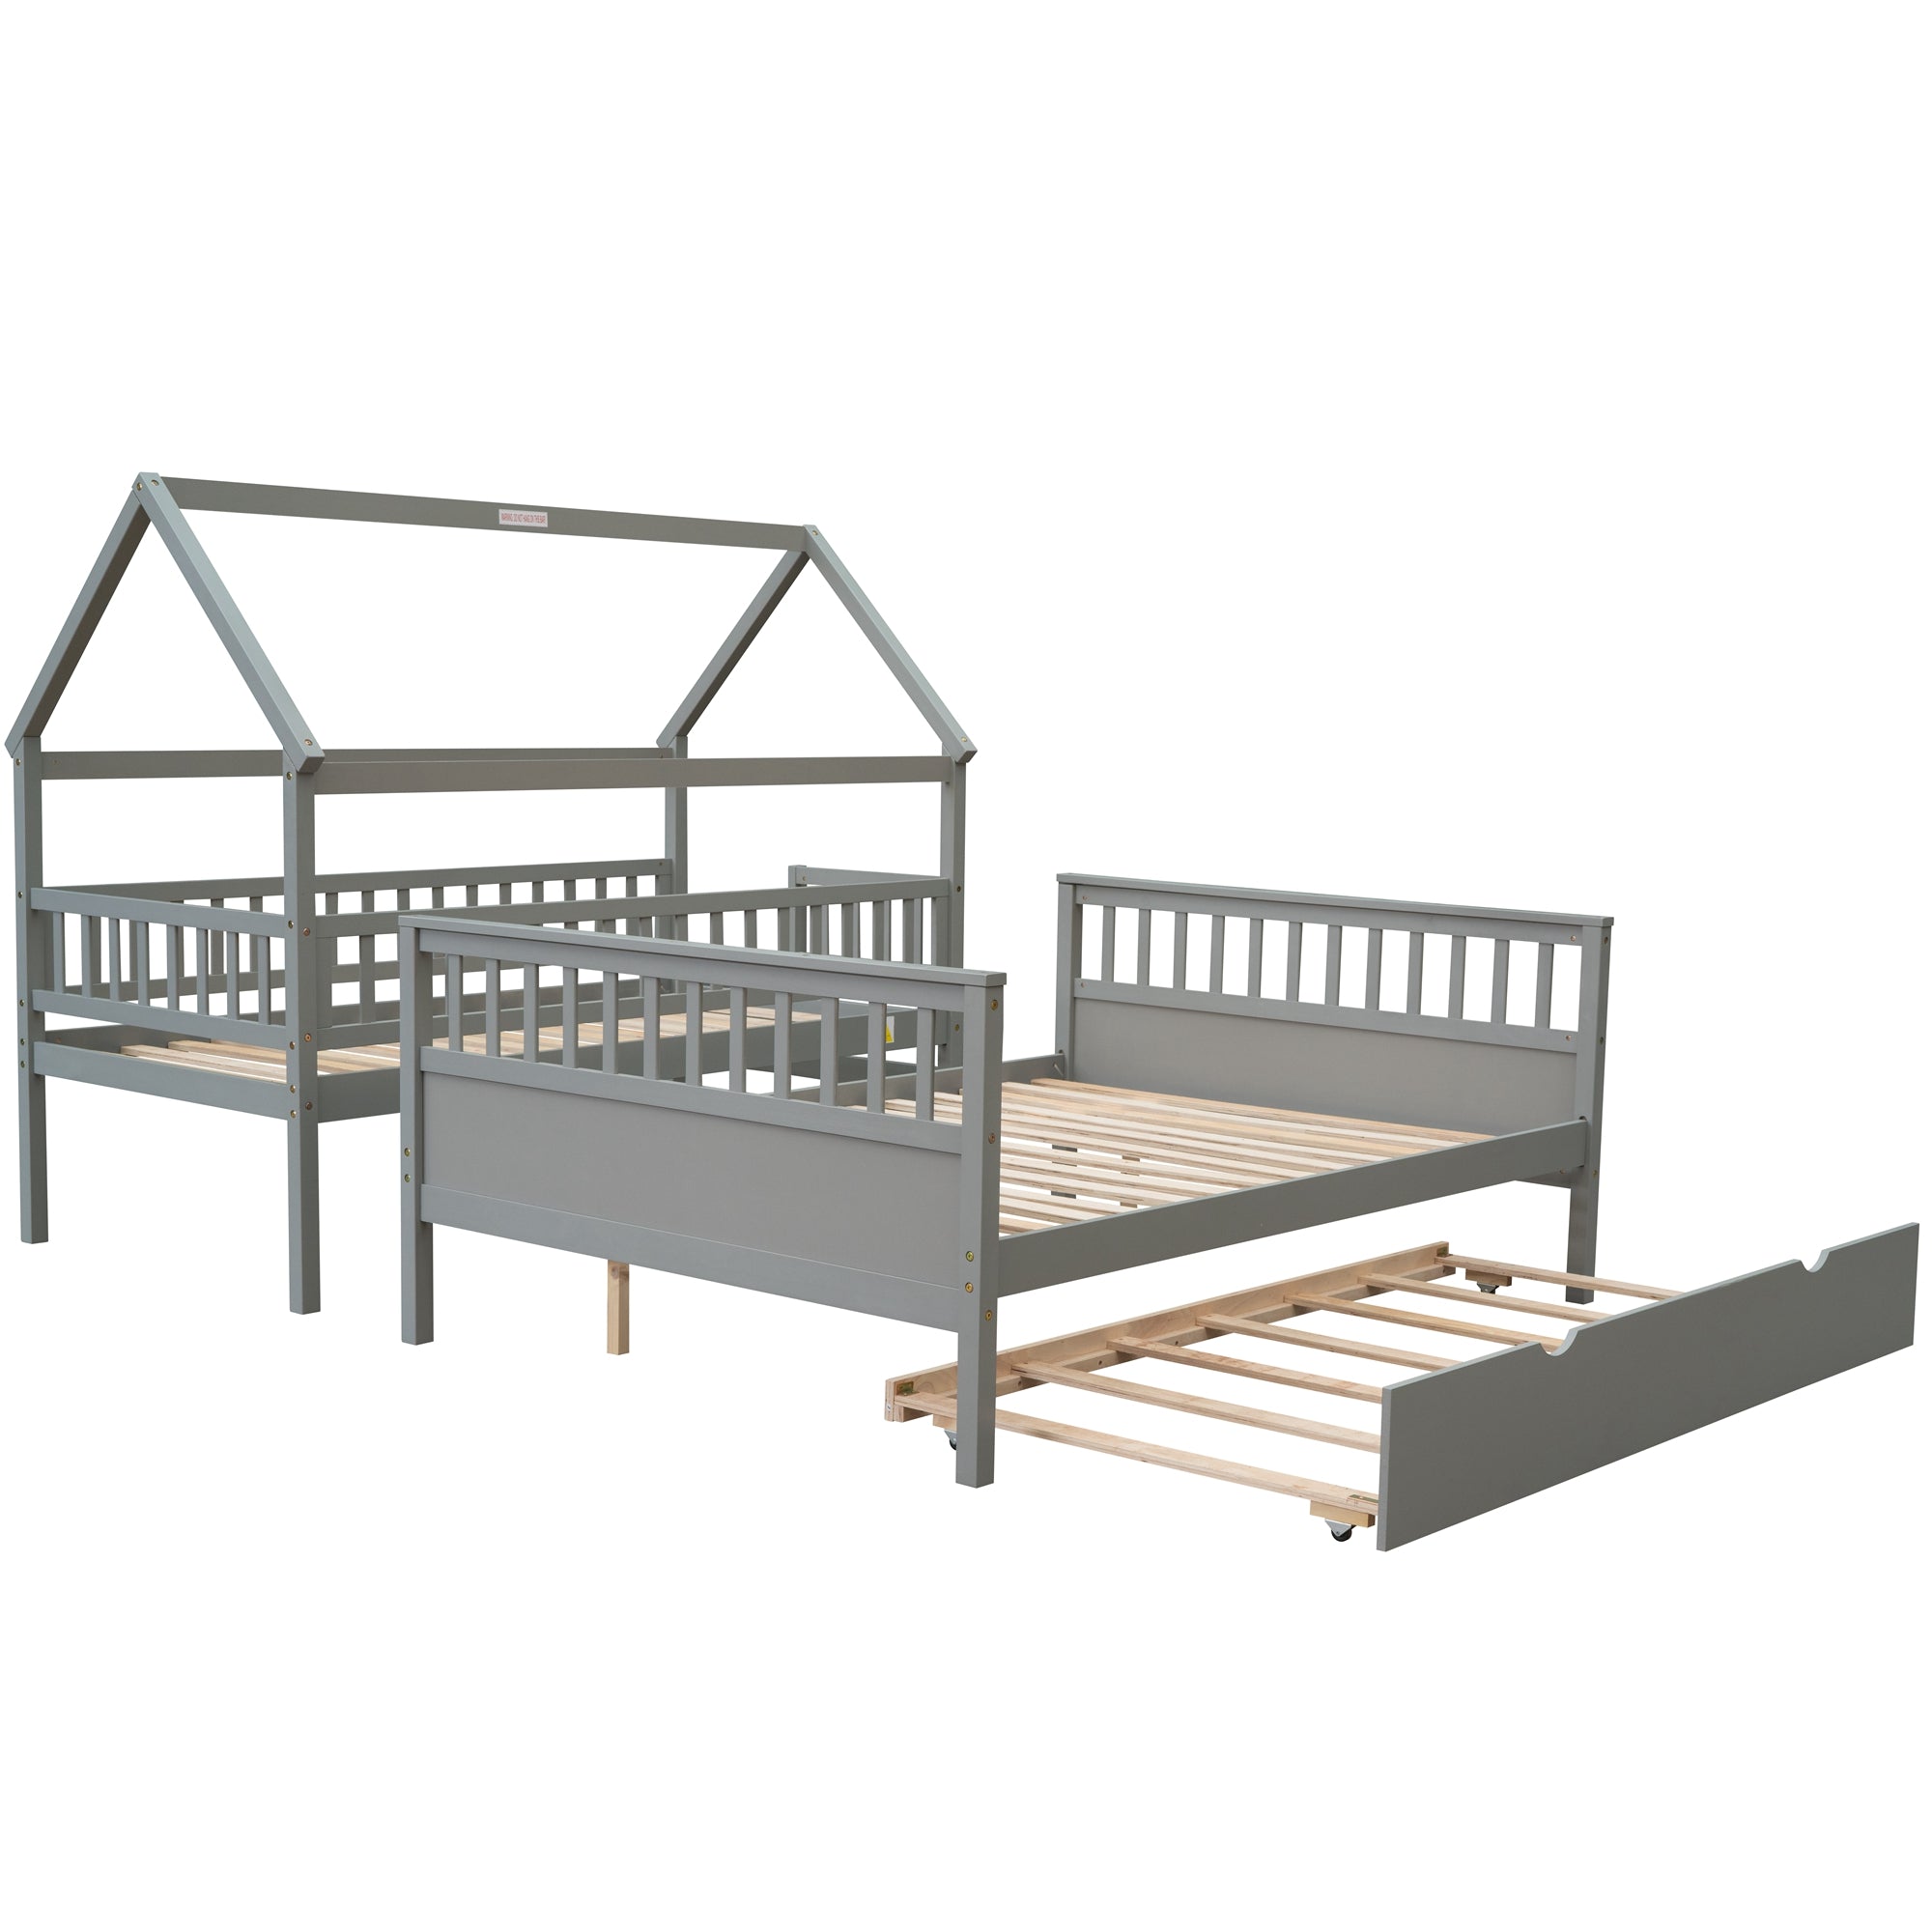 EUROCO Twin over Full House Bunk Bed with Trundle for Kids, Gray